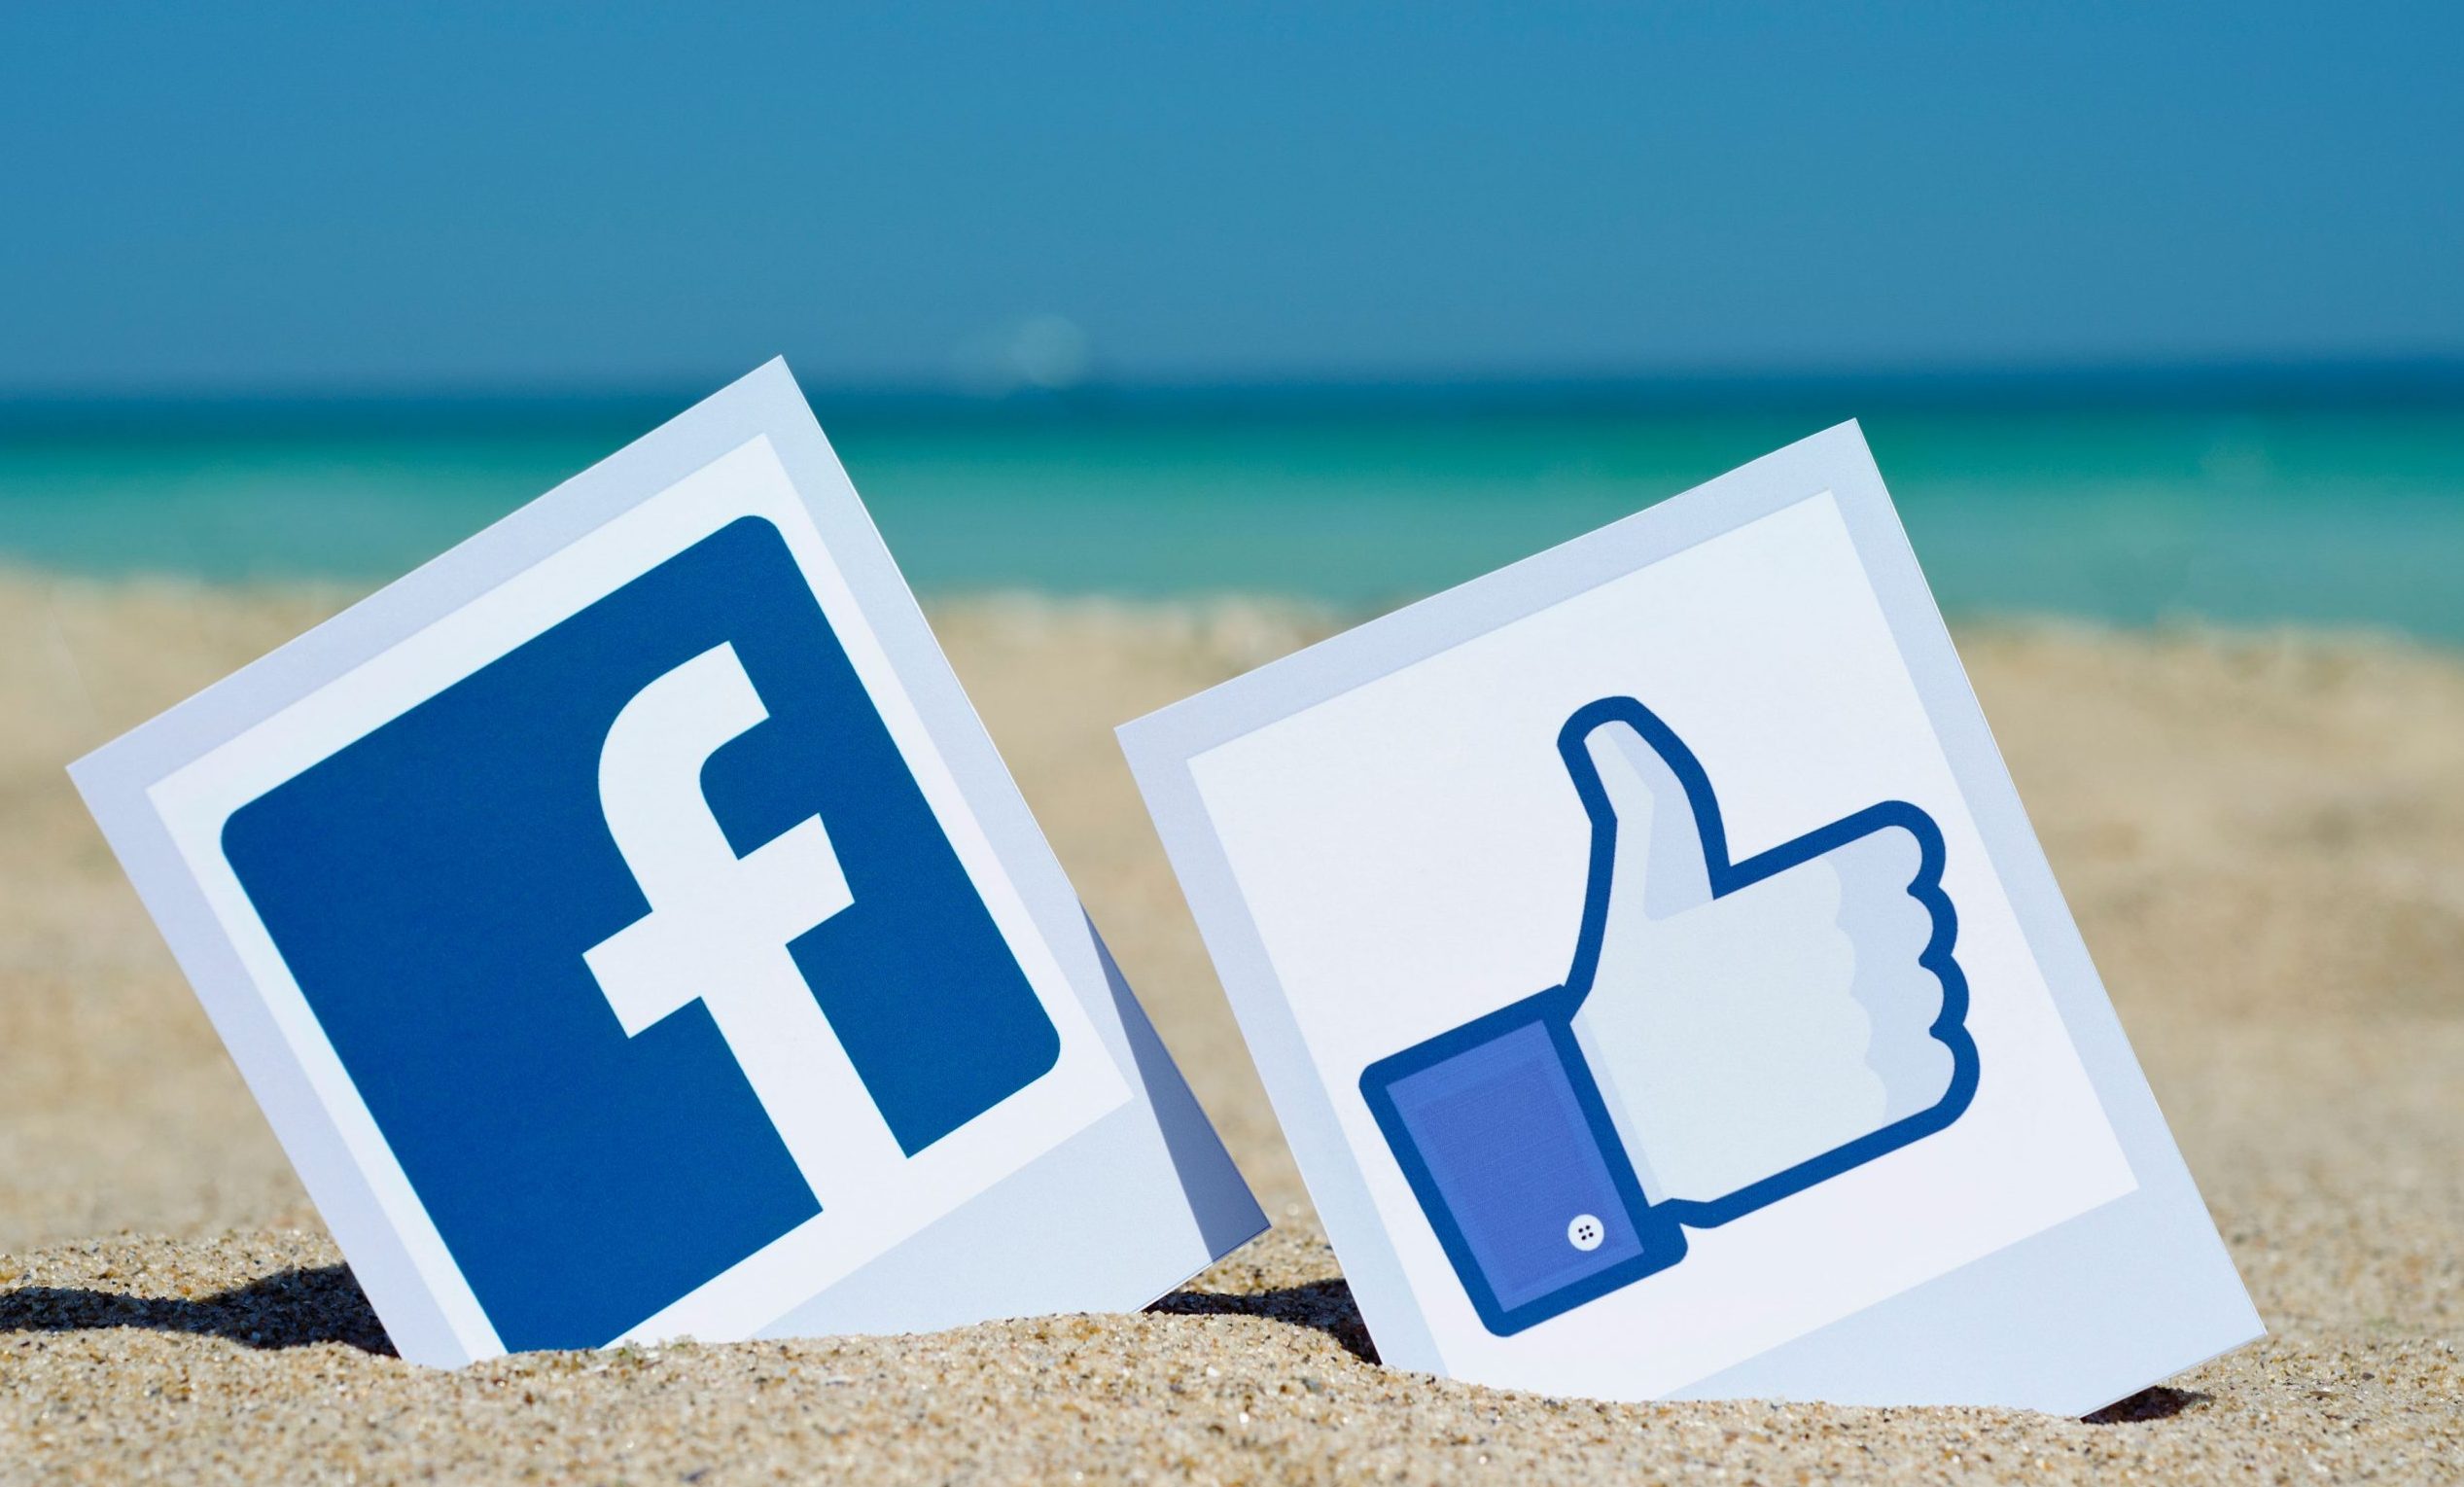 how to get more likes on facebook